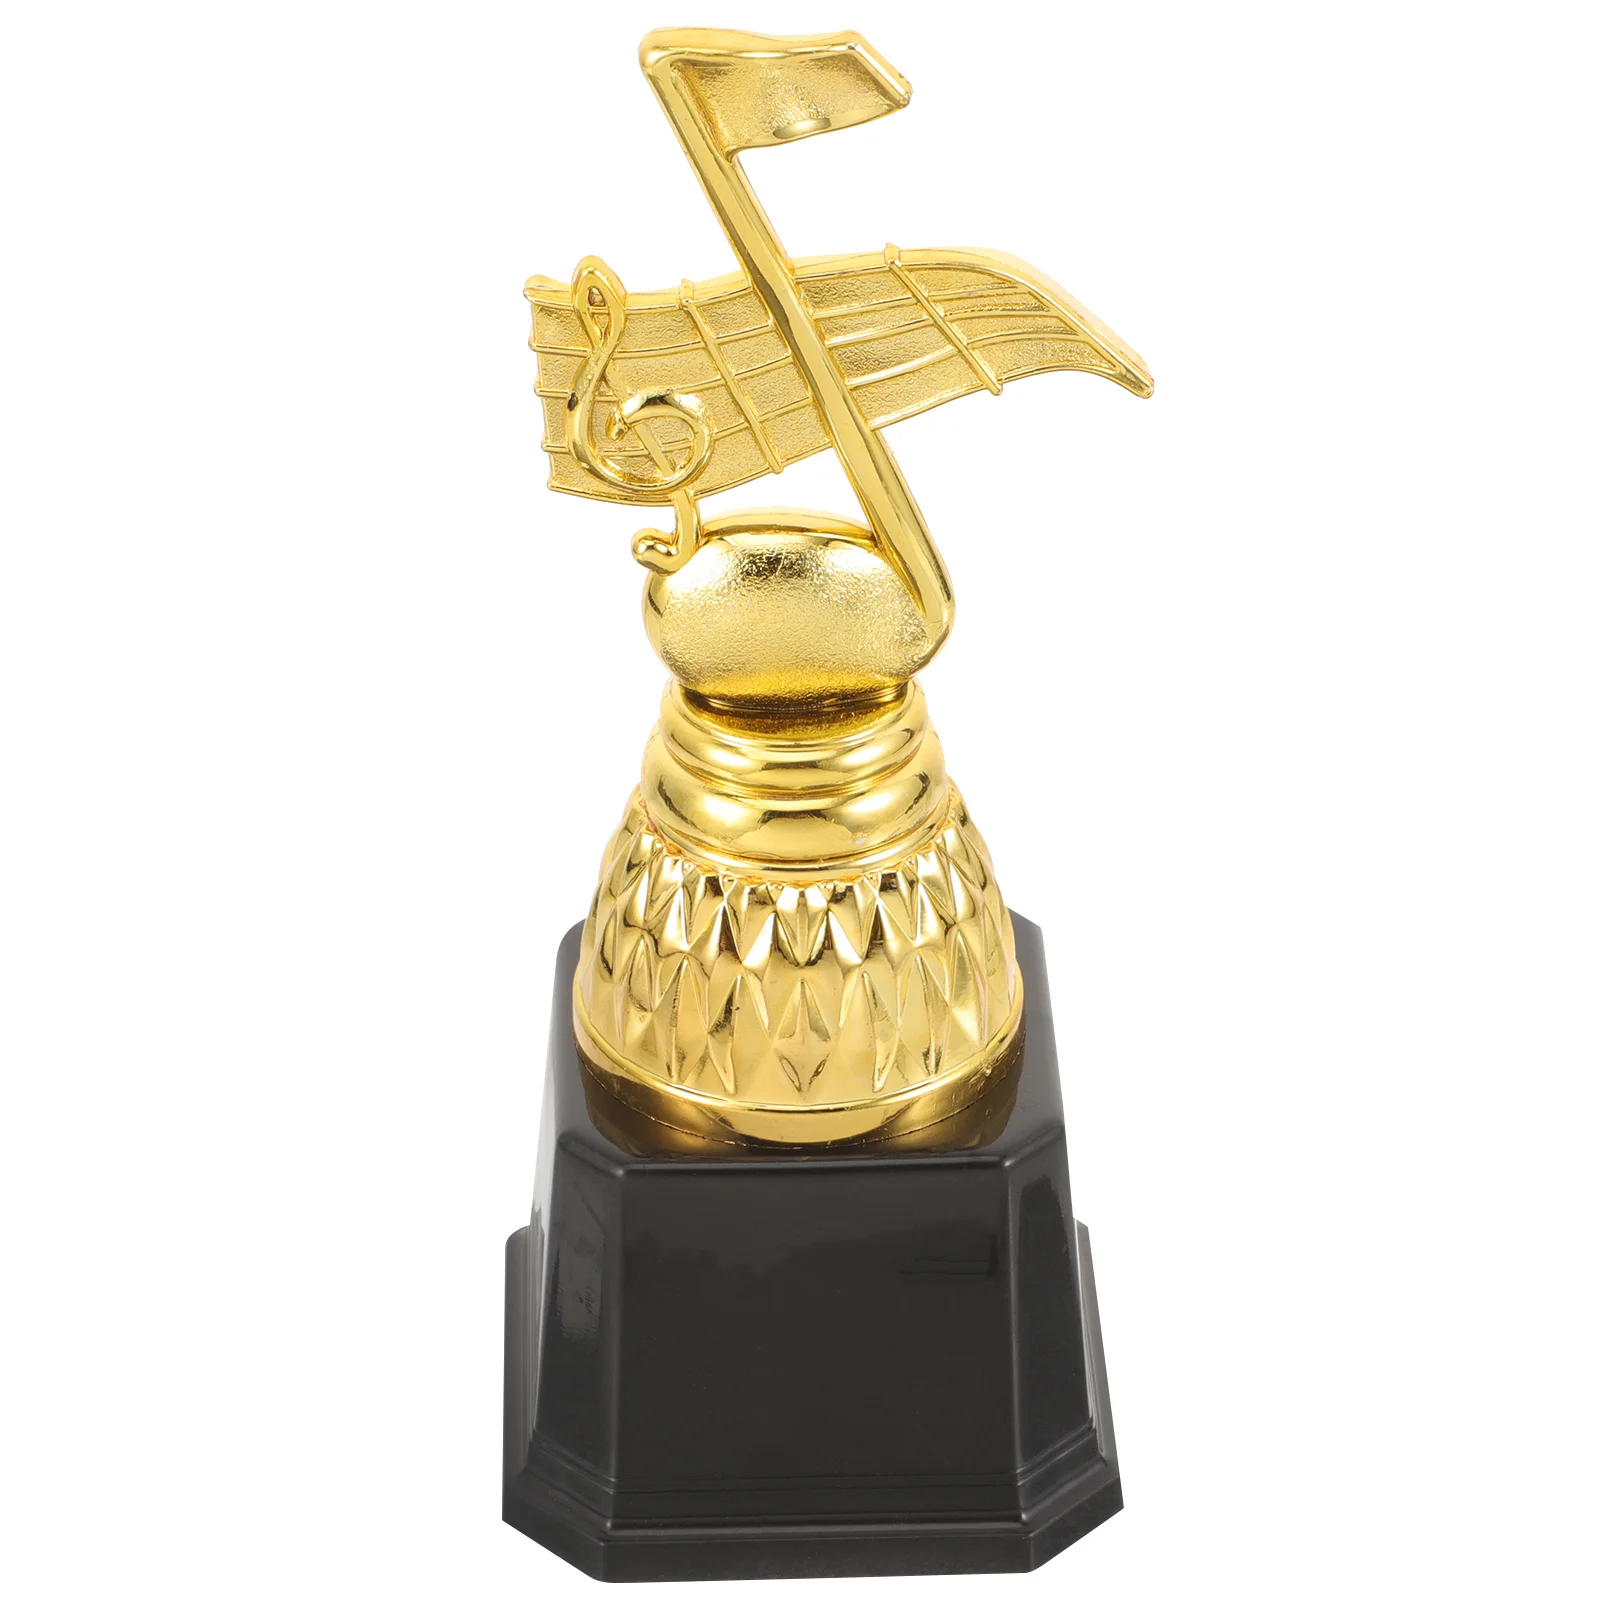 

Gift Honor Trophy Decorative Delicate Small Decoration Singing Competition Award Contest Musical Plastic Trophies